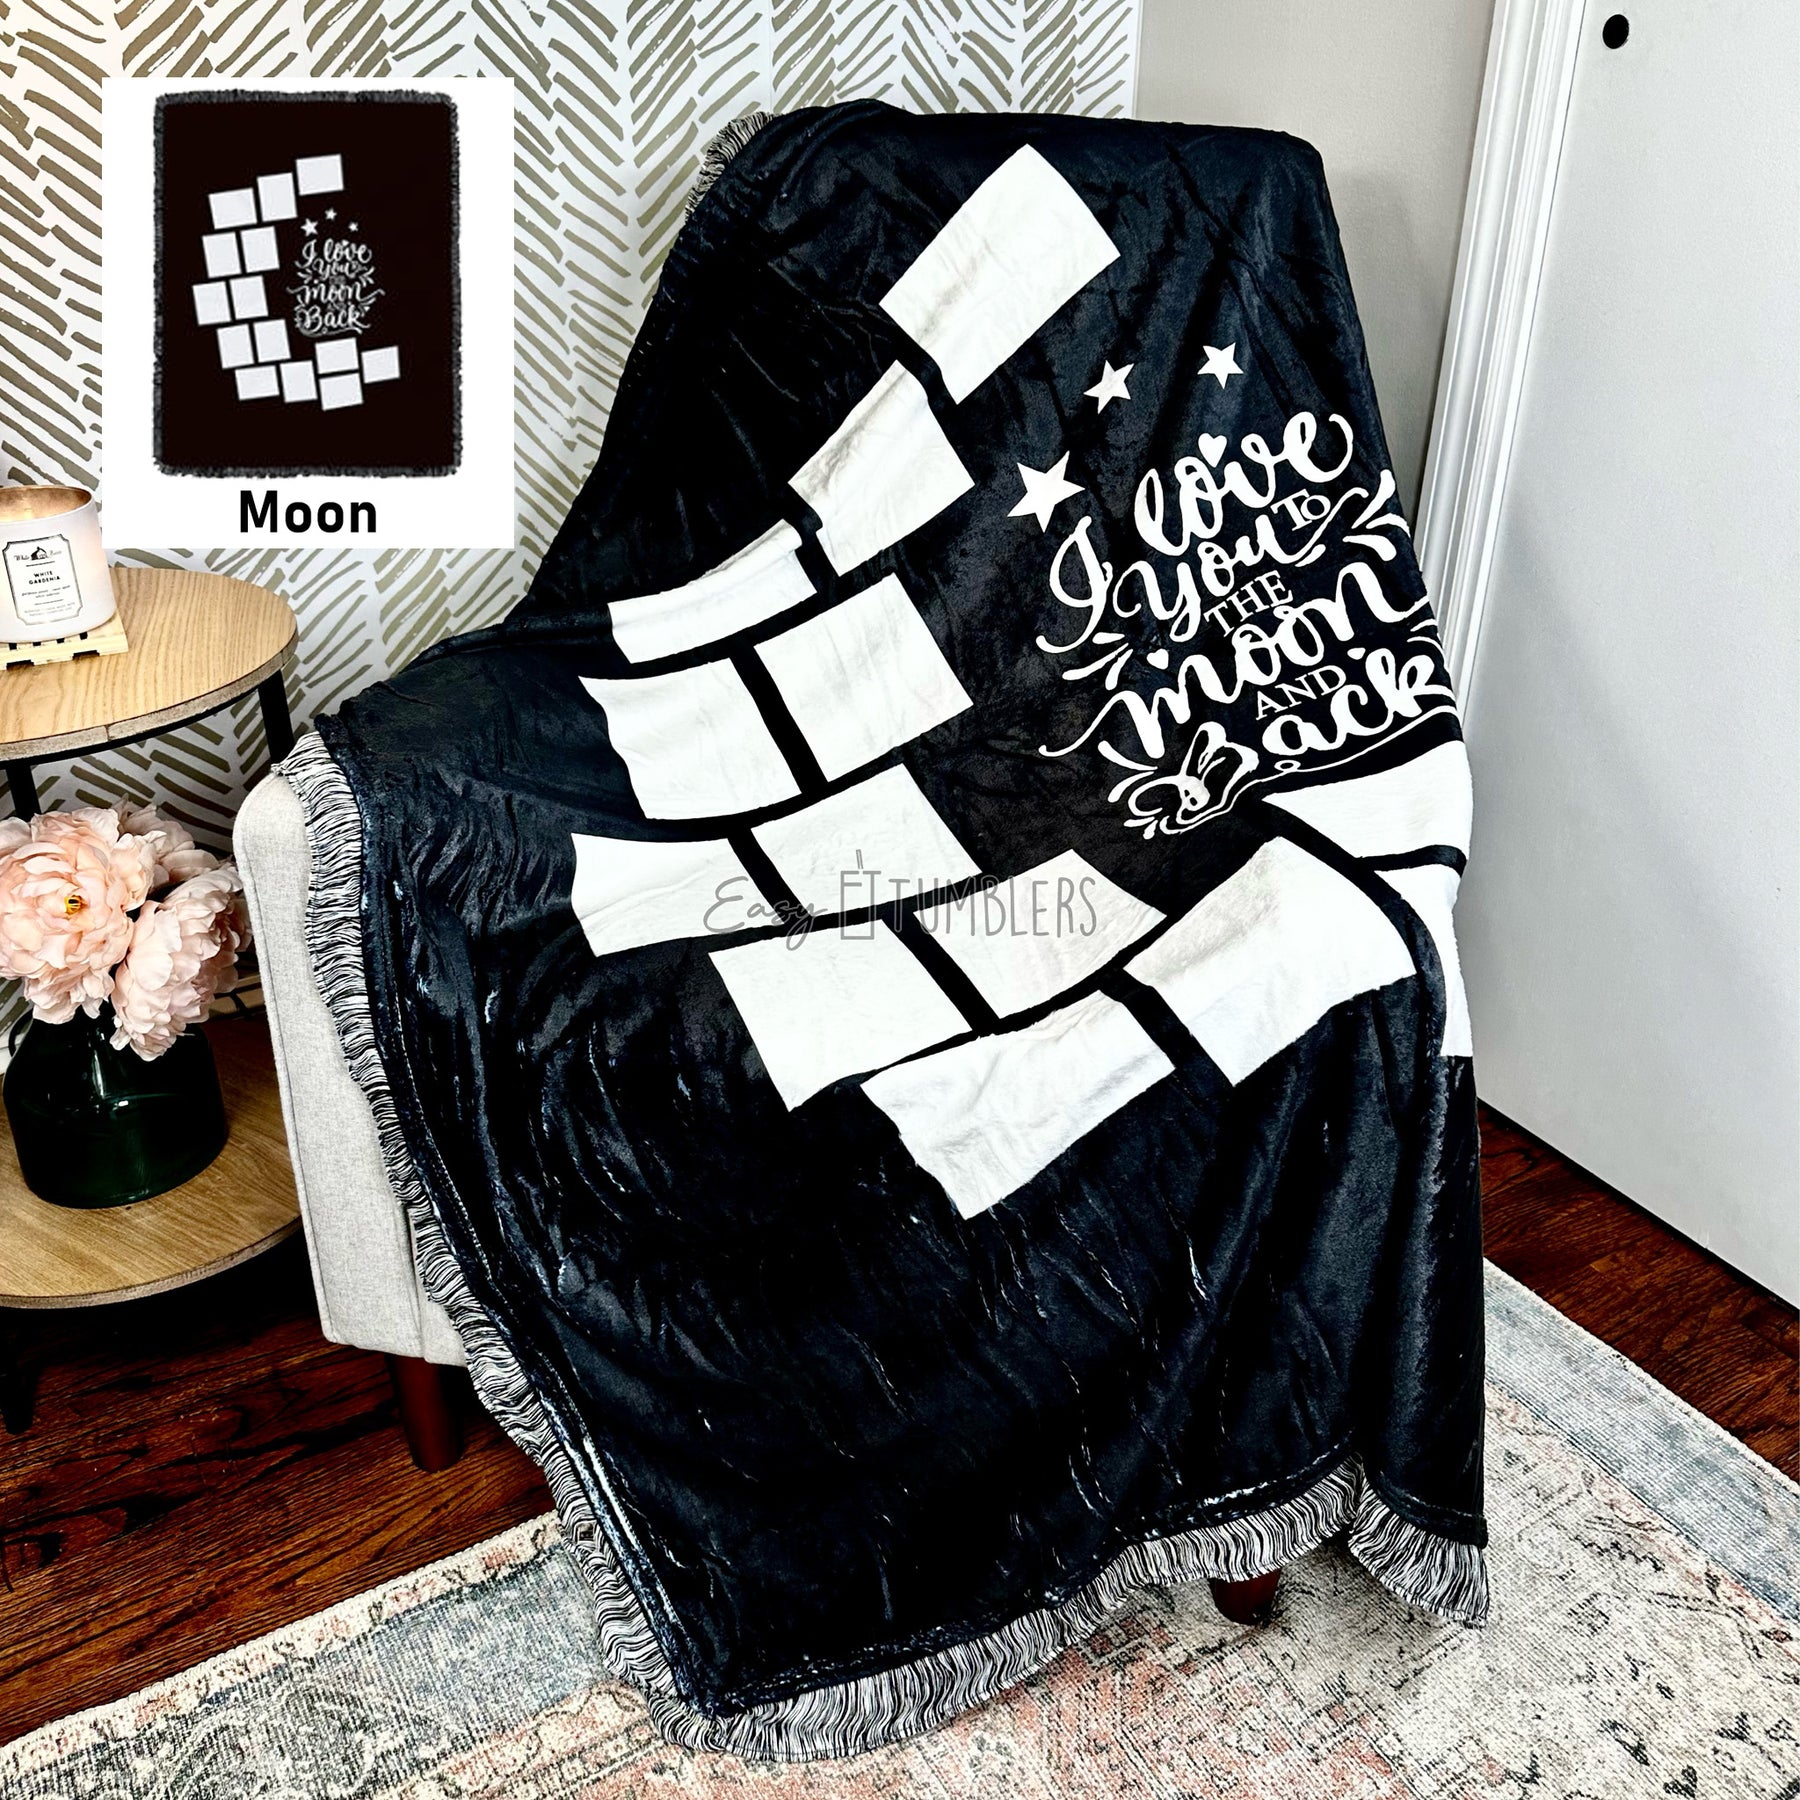 Sublimation Blanket / I Love You to the Moon Blanket / Sublimation